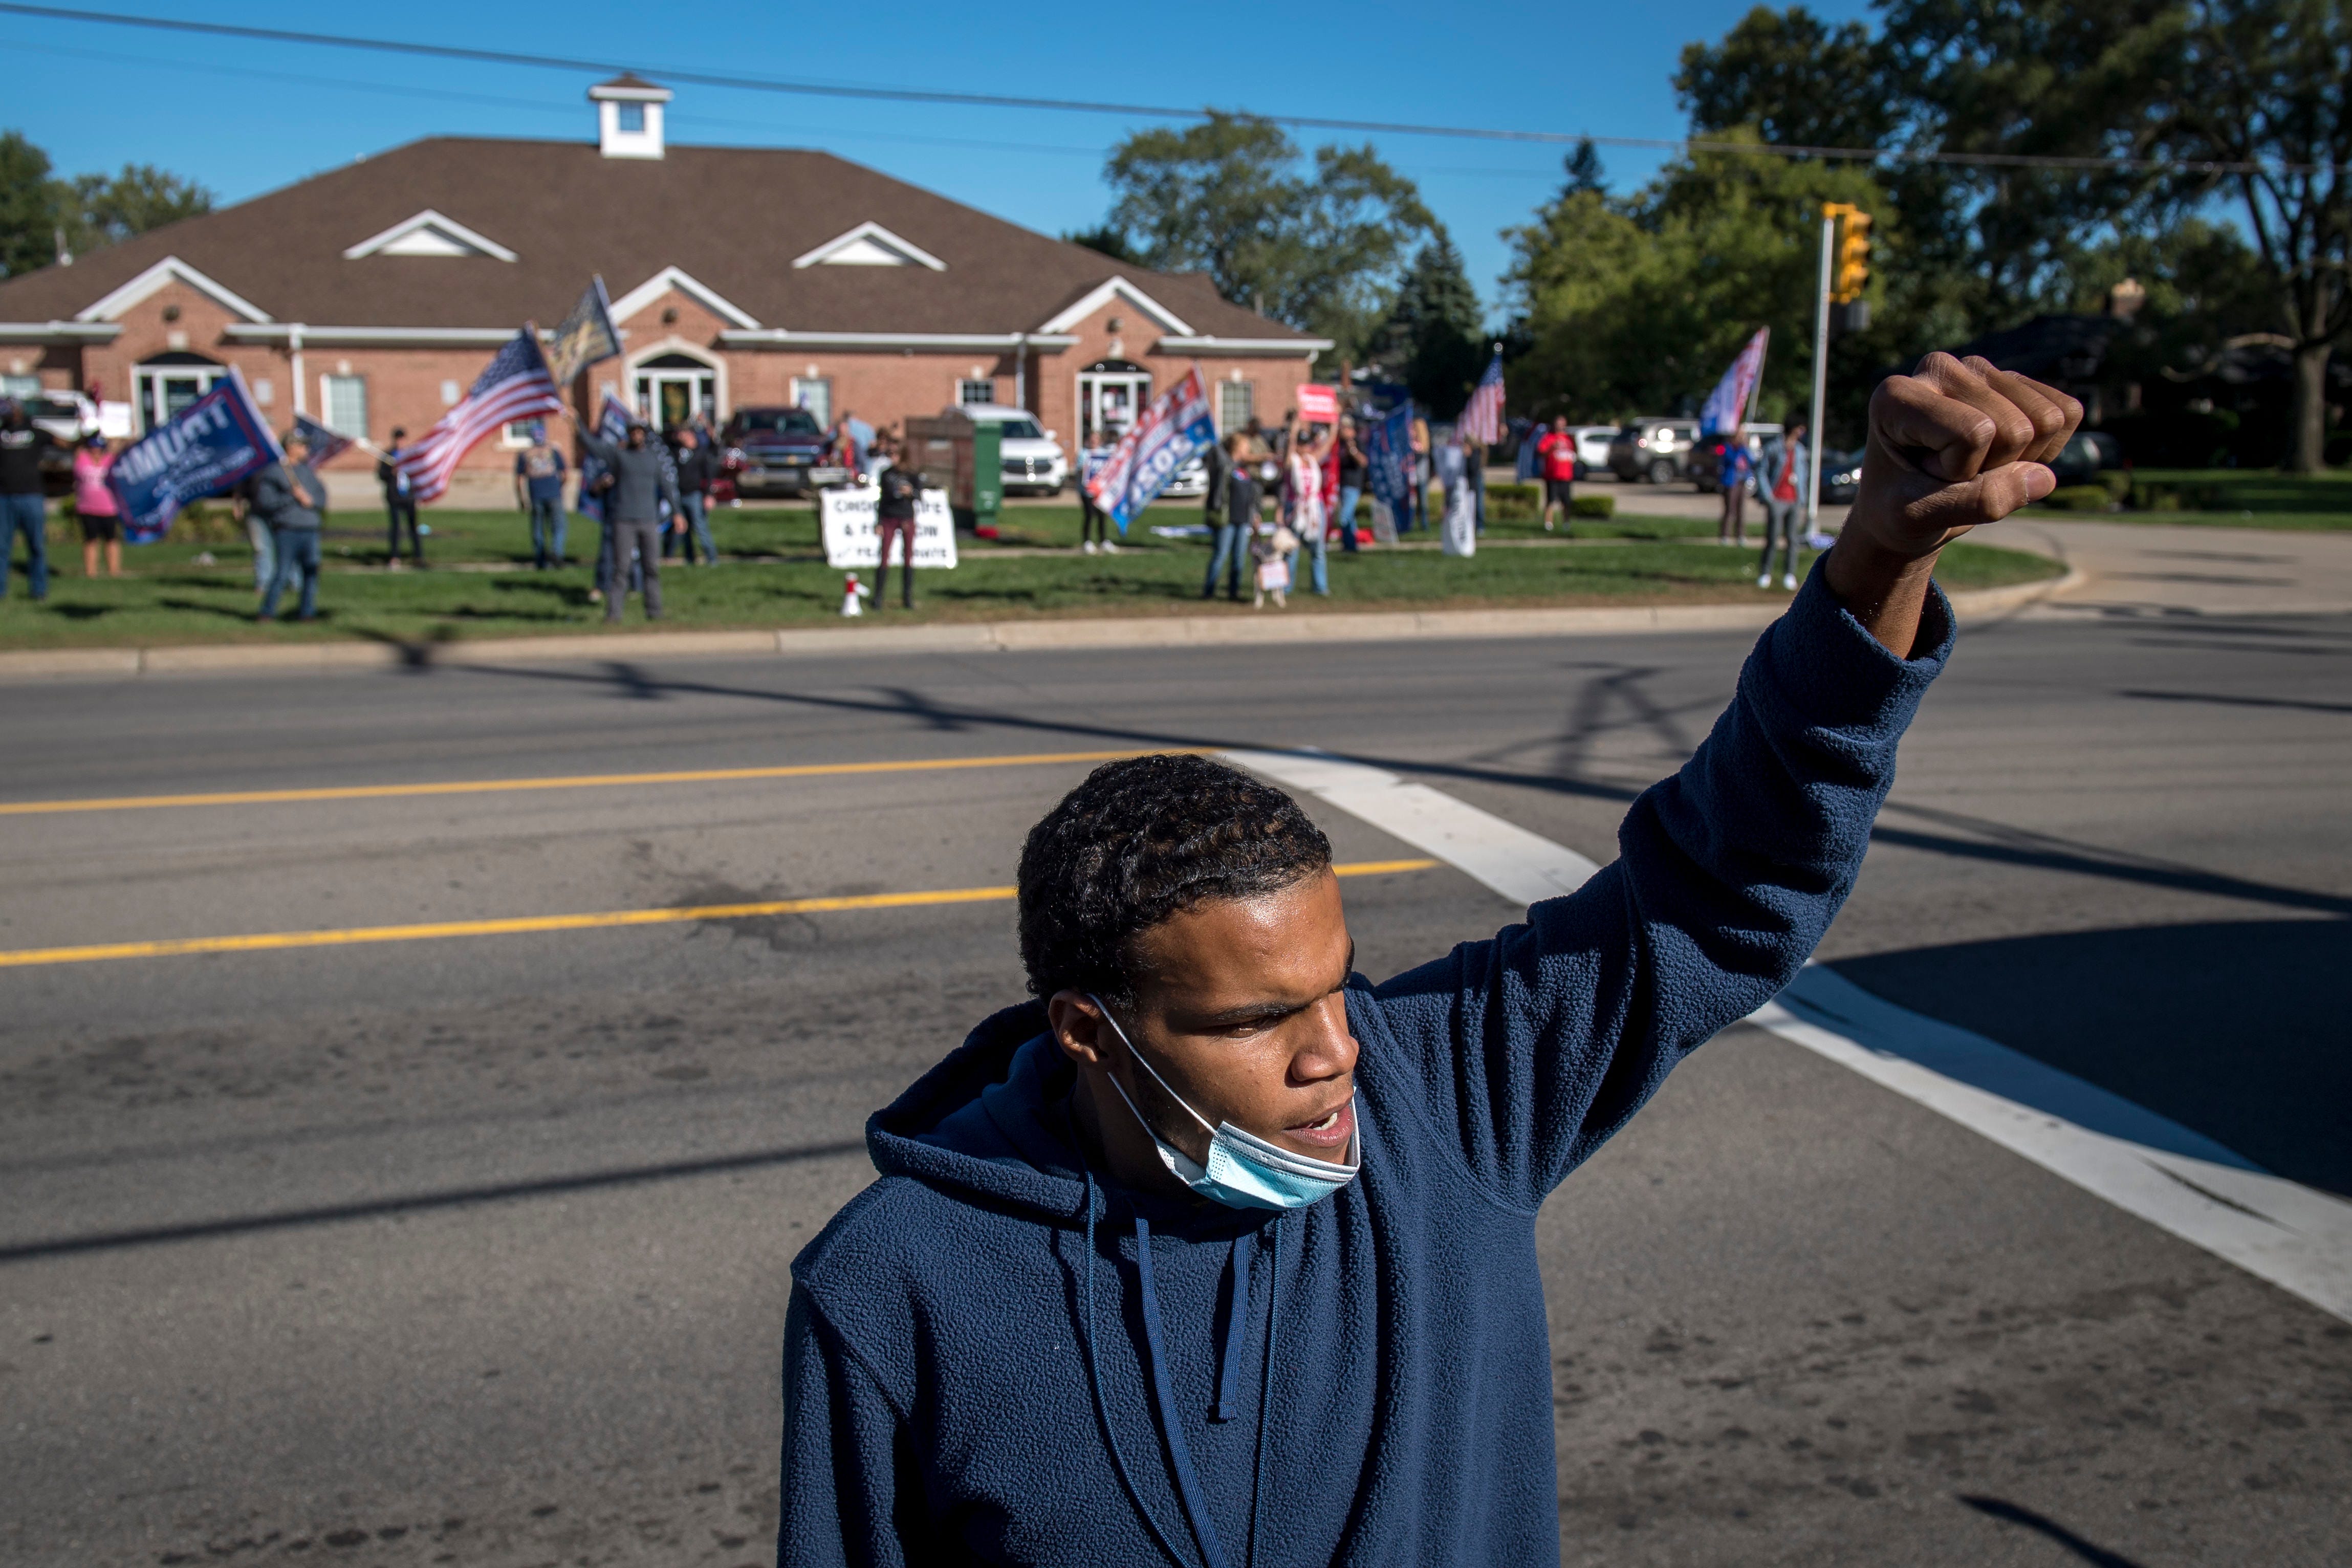 Jordan Williams raises his fist while Trump supporters counter protest before the March Against Racism in Warren on Sept. 19, 2020. The march in Warren occurred in response to the city called hate crimes against residents Candace Hall, her husband Eddie and their two children.